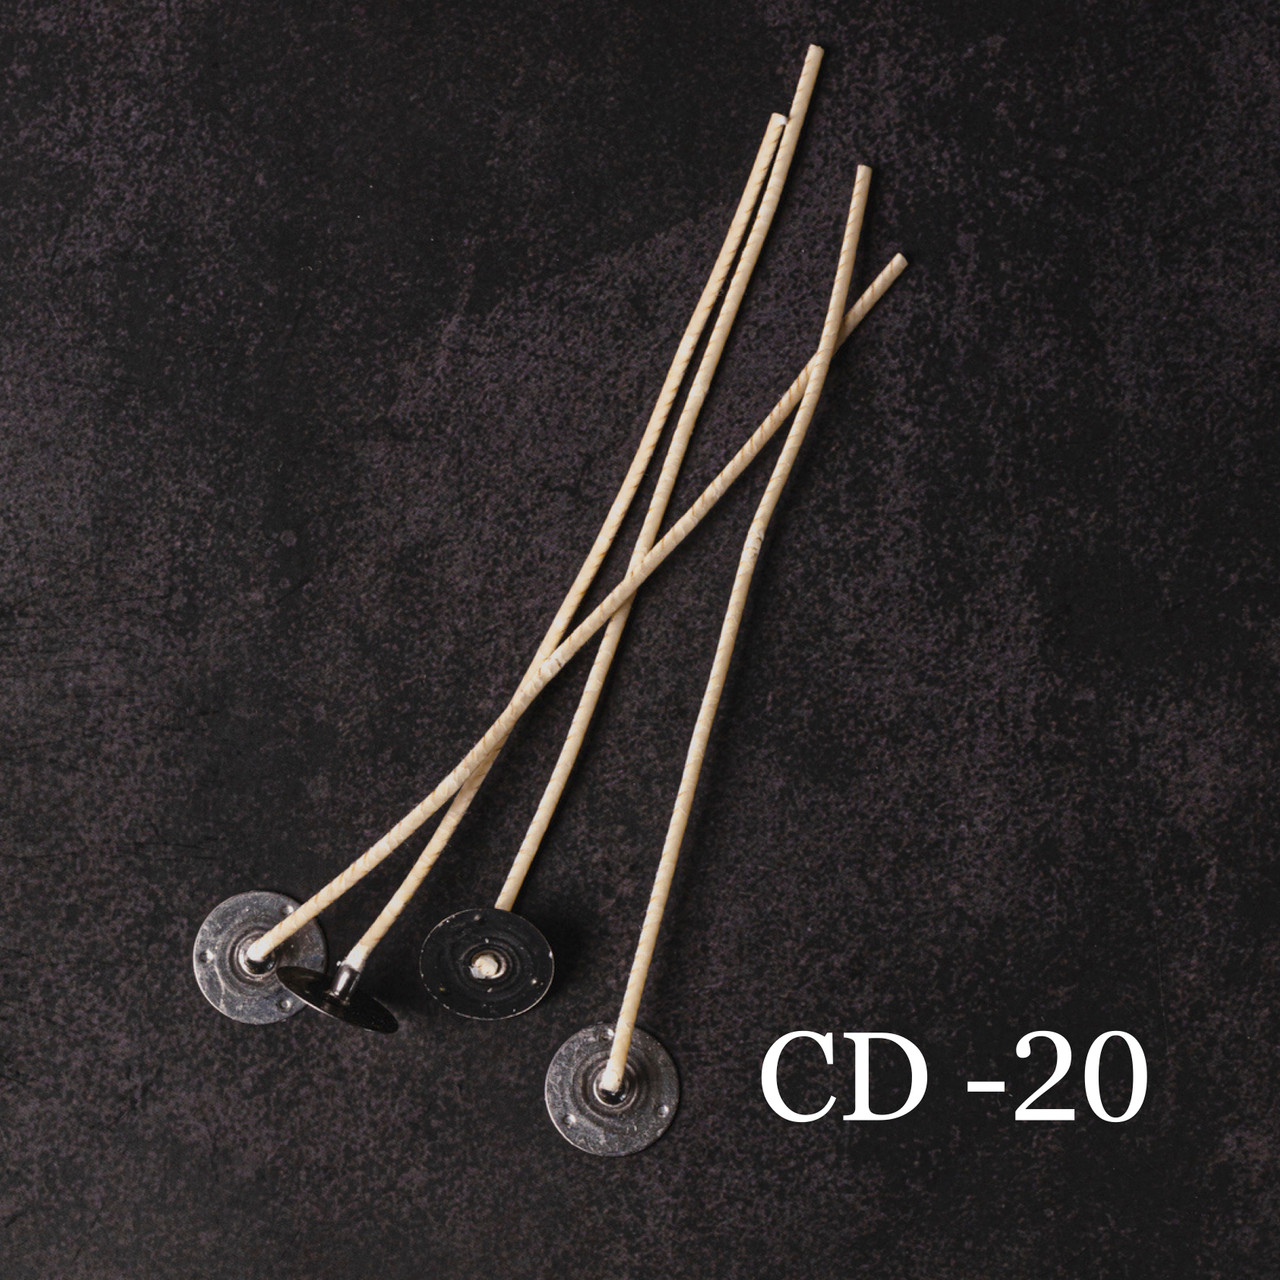 MILIVIXAY CD Series Candle Wicks for Soy Candles,100pcs CD 20 6 Pretabbed  Wicks,Cotton & Paper Wicks for Candle Making.